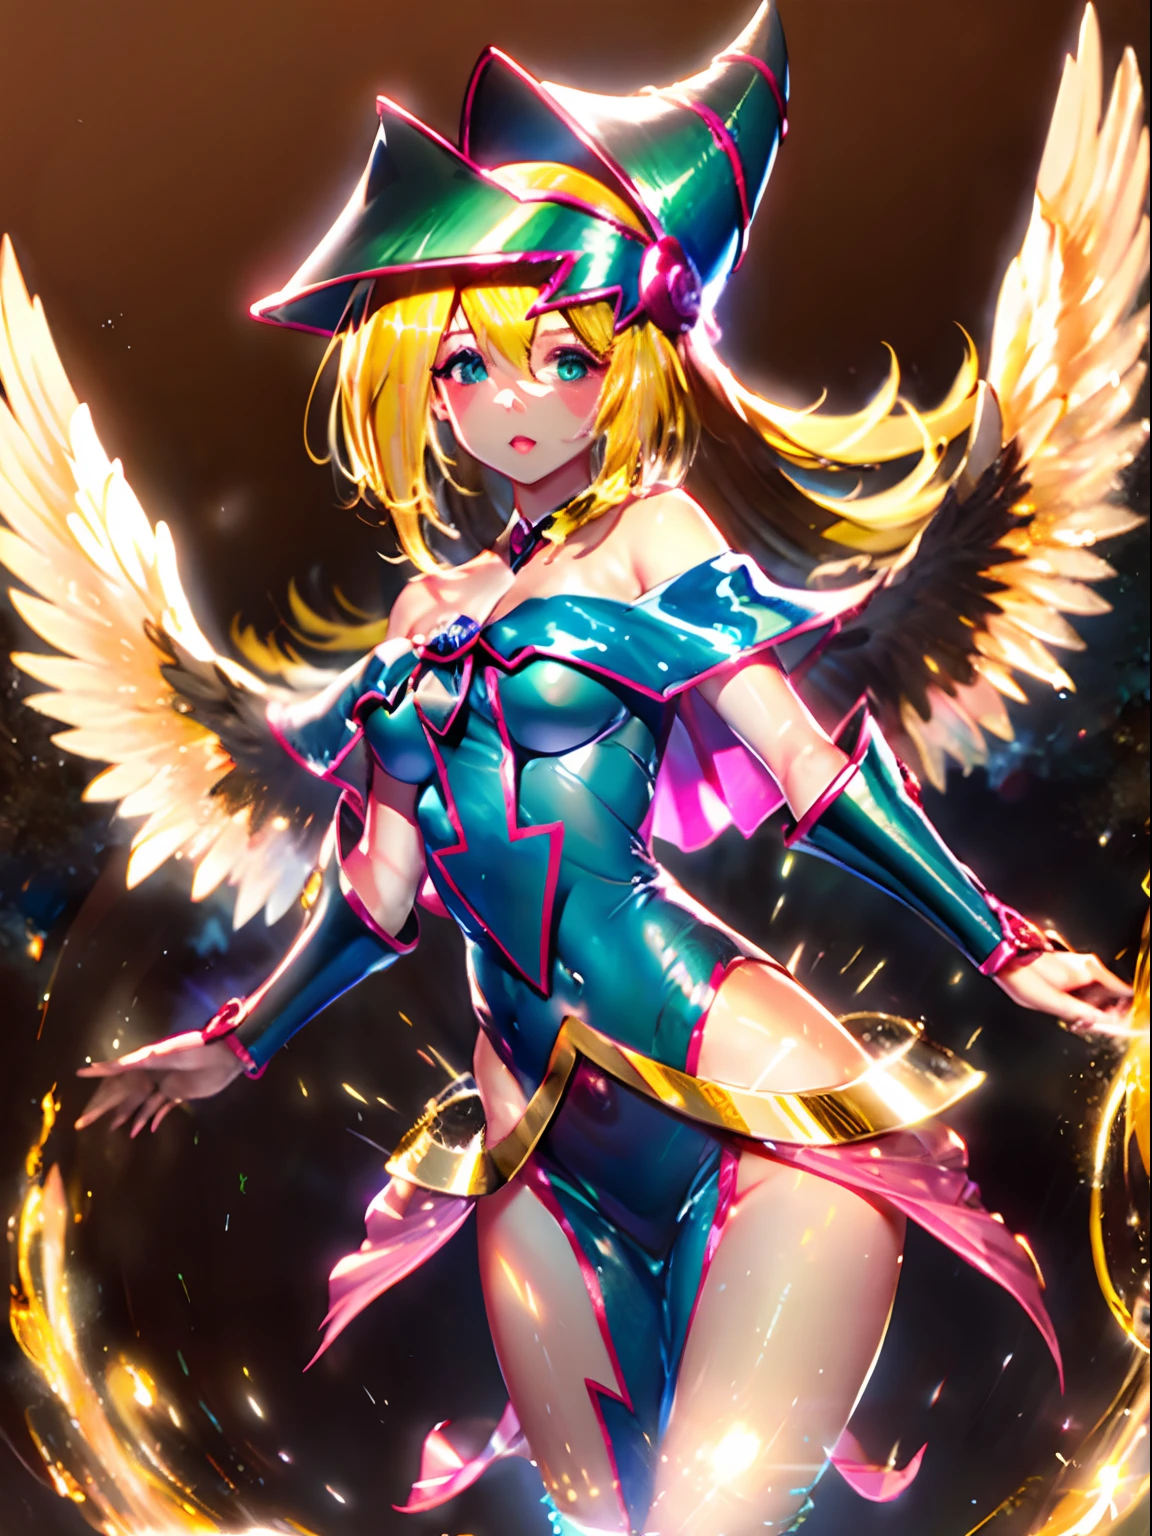 1. Mujel Dark Magician:2-Day Angel Edition:1 Spread your wings:3 in a coat of white feathers, Wings full of the back, glowing halo, Long flowing hair, Mechanical wings dancing delicately at the waist, Median number, Sunken navel, curtains of white feathers on the pelvis move slightly,, Mini wings splashing the body, Multiple wings with a yellow glow, Soft yellow fire between the wings. Beautiful black magician girl heavenly angel version.